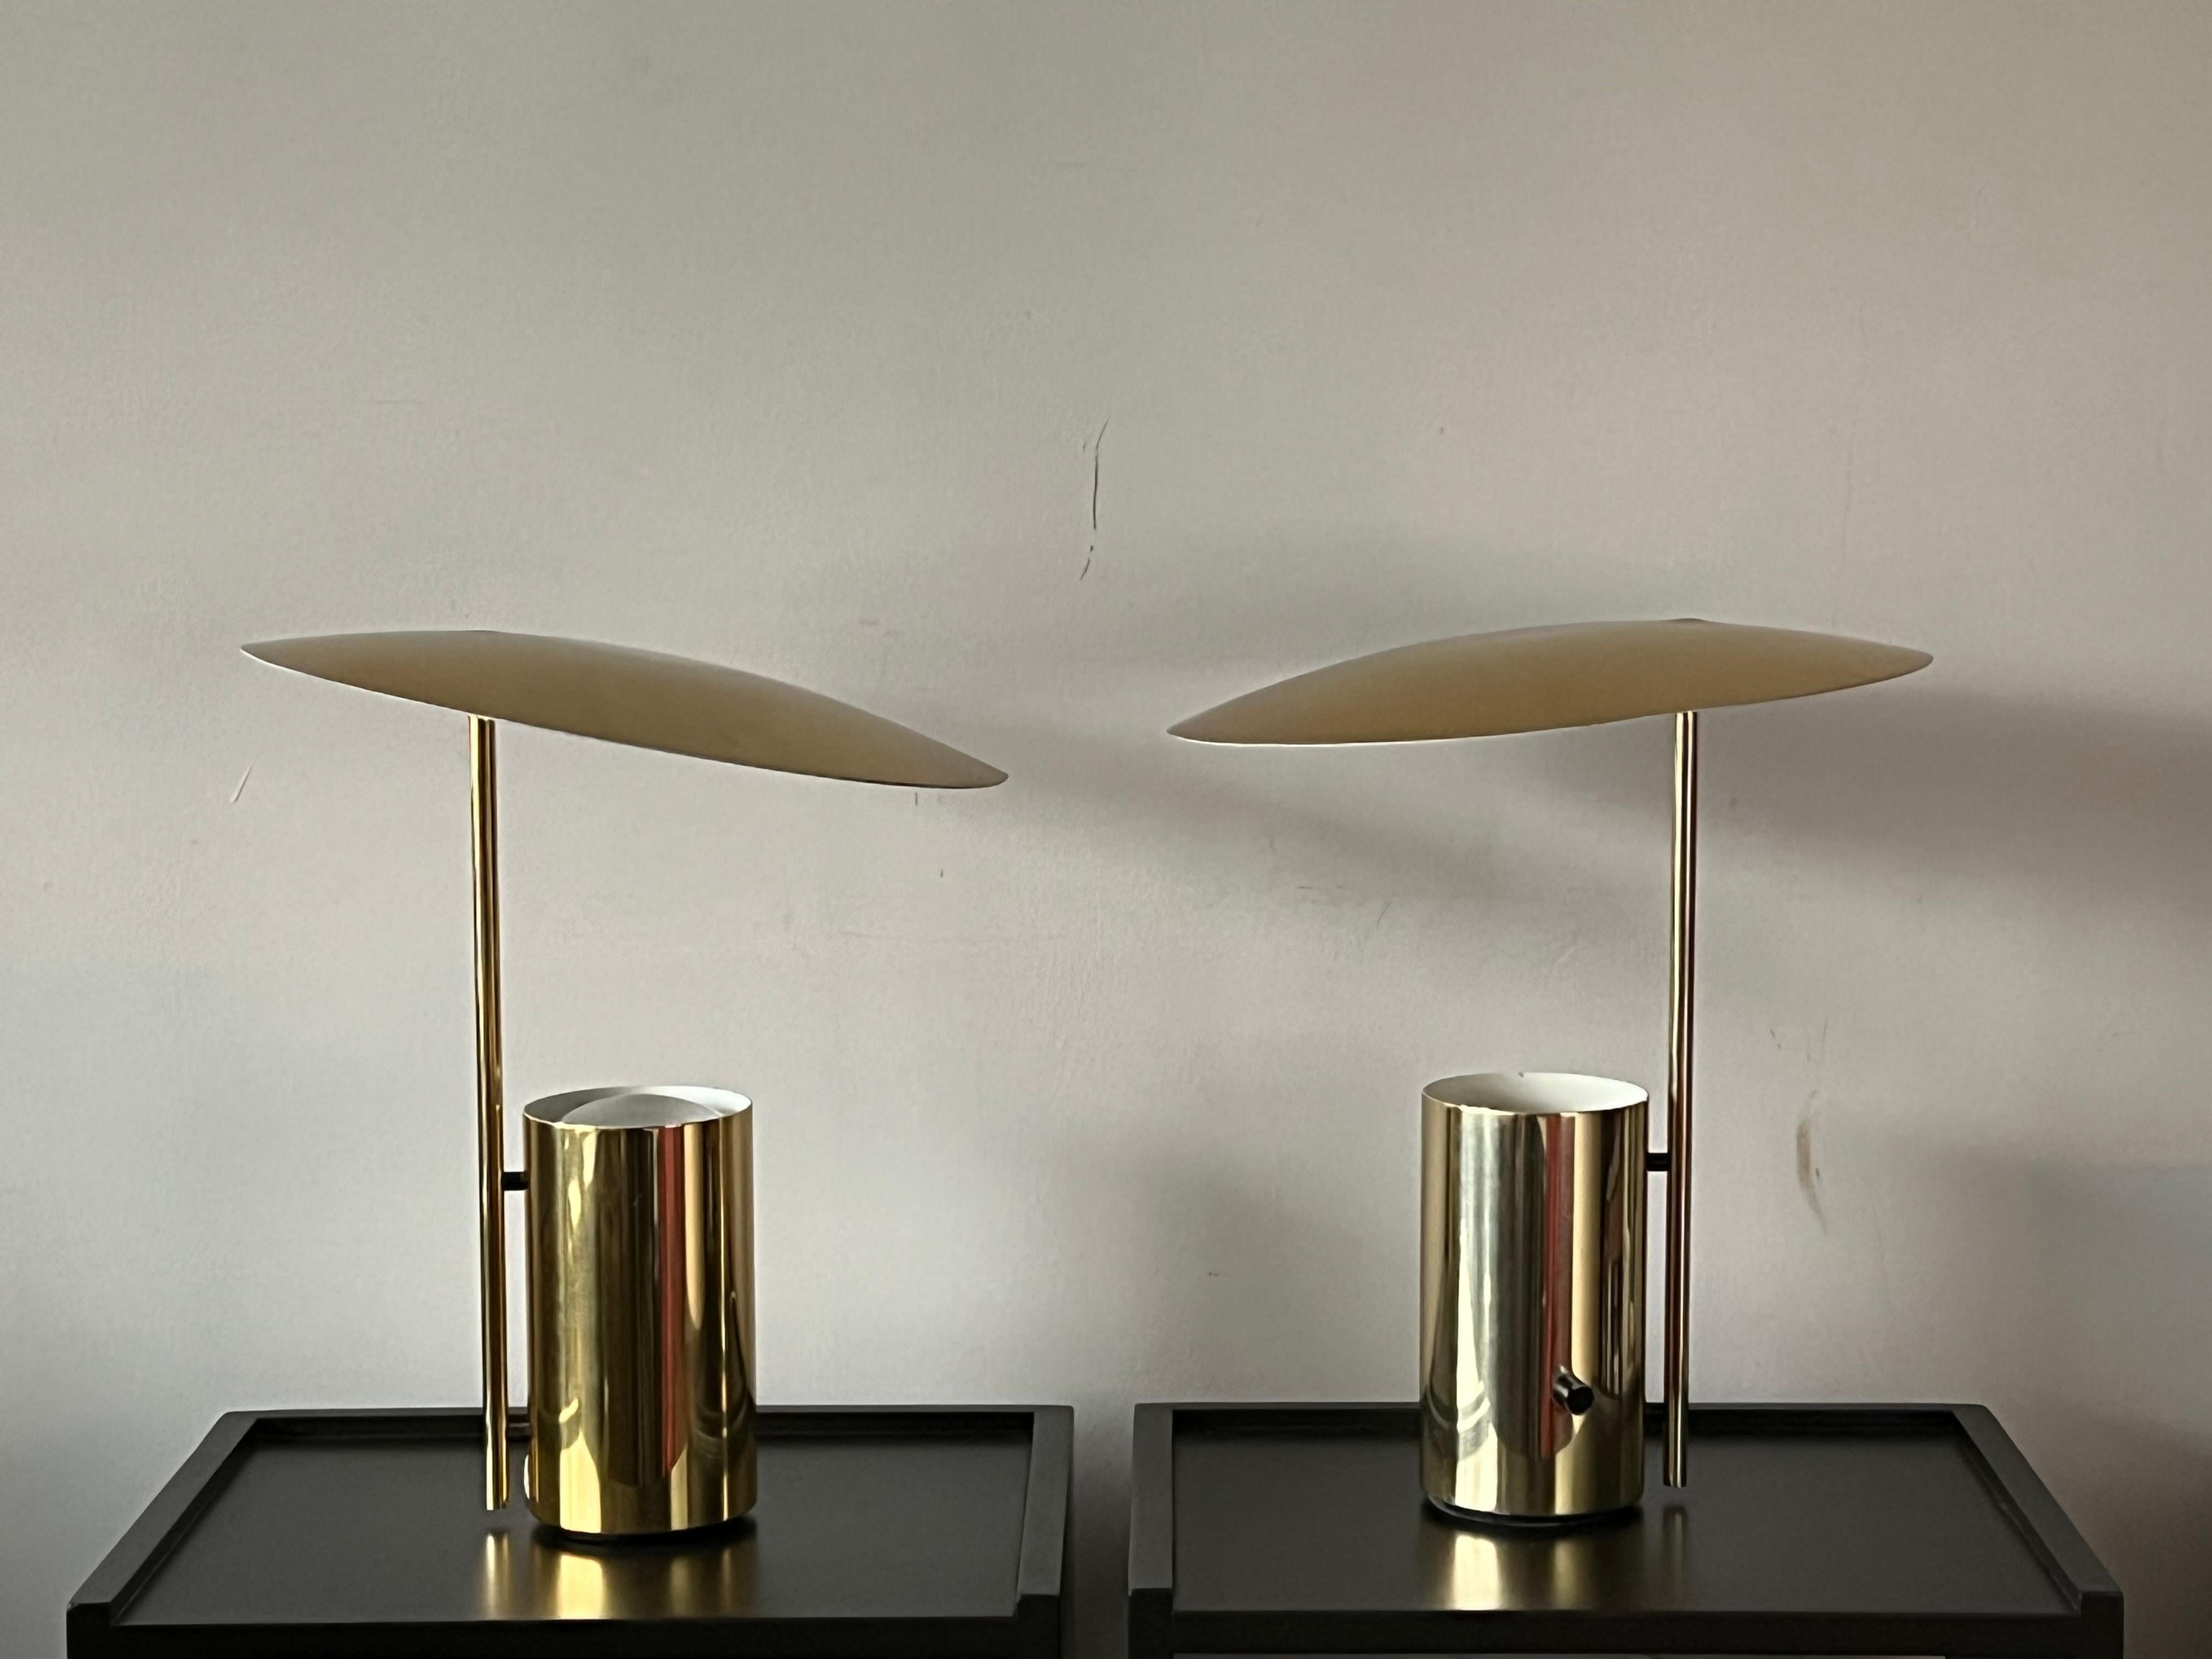 A classic pair of George Nelson Half lamps for Koch Lowy. In brass finish. Very good overall conditon. One shade has a small dent.